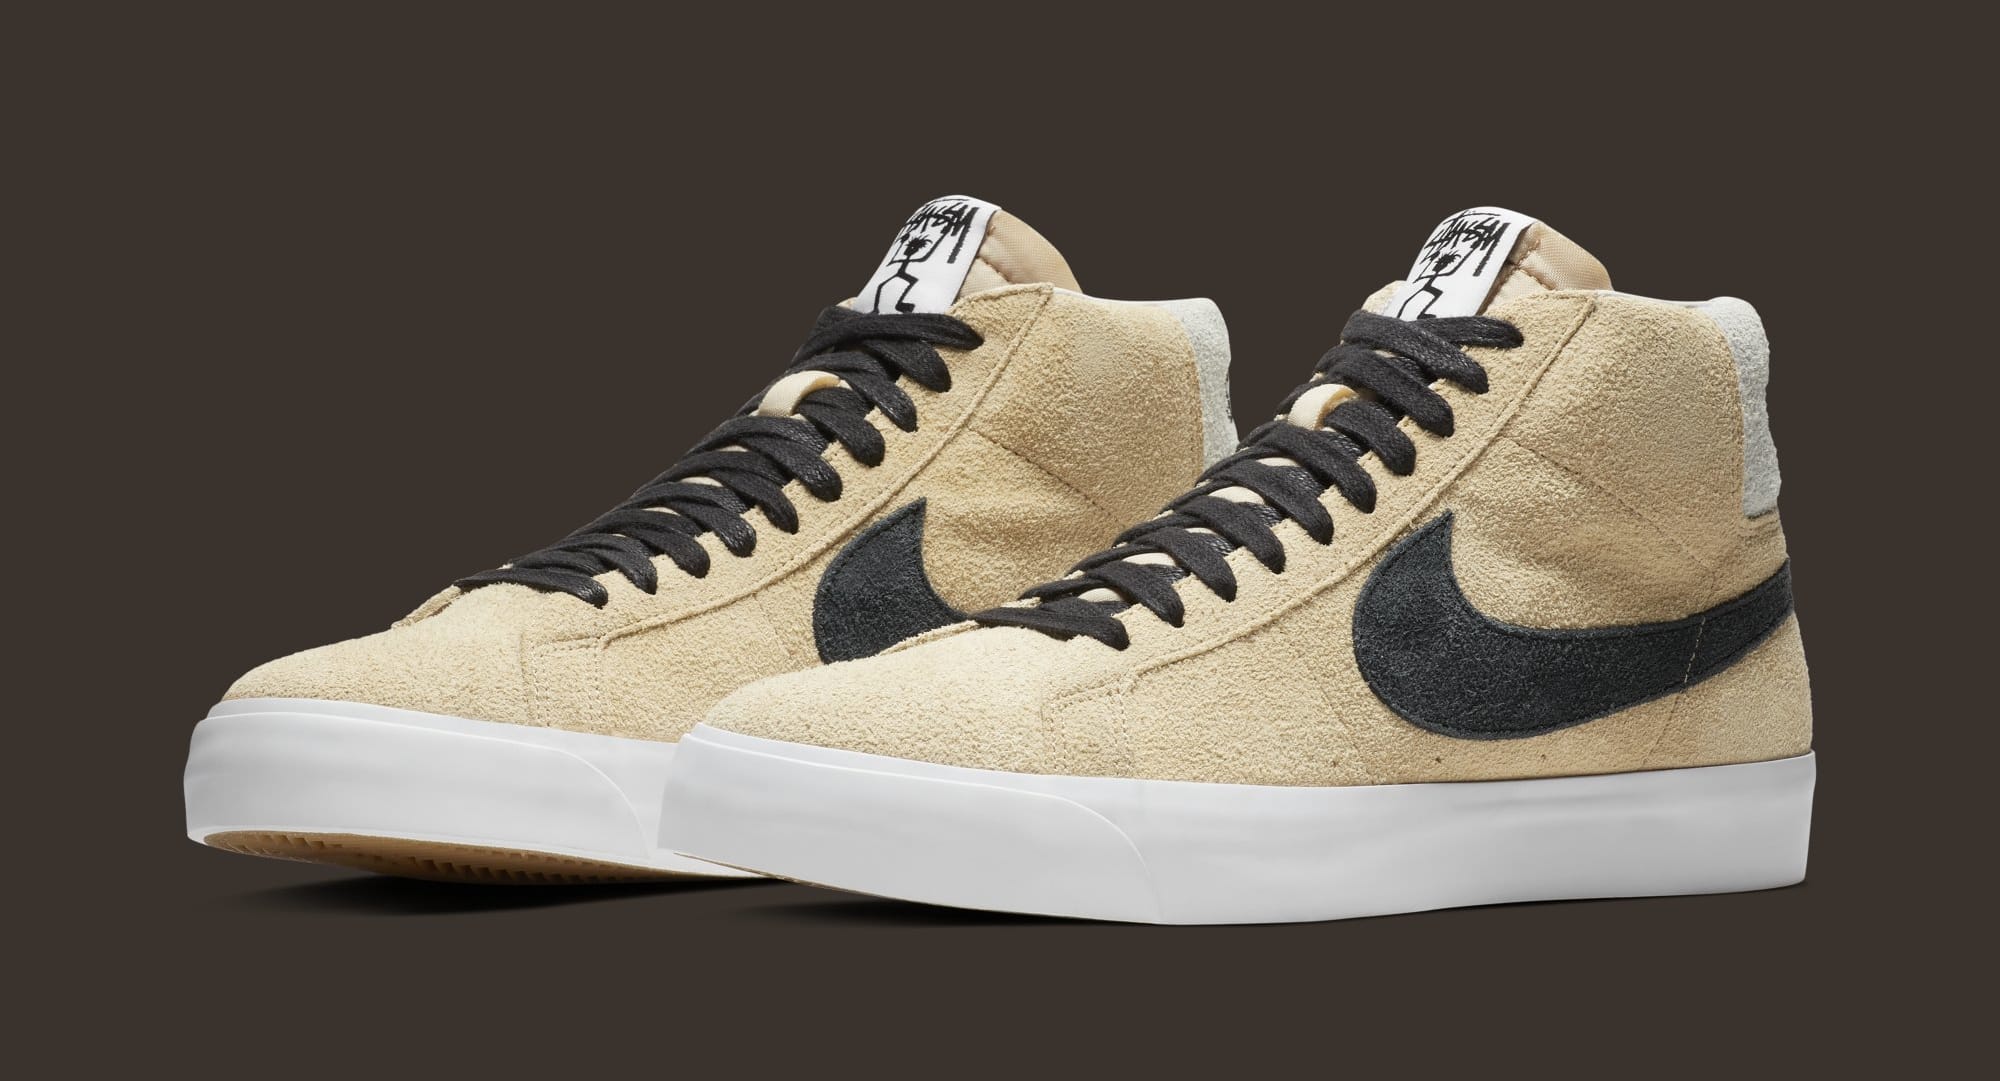 Stüssy Officially Announces New Nike SB Collab | Complex